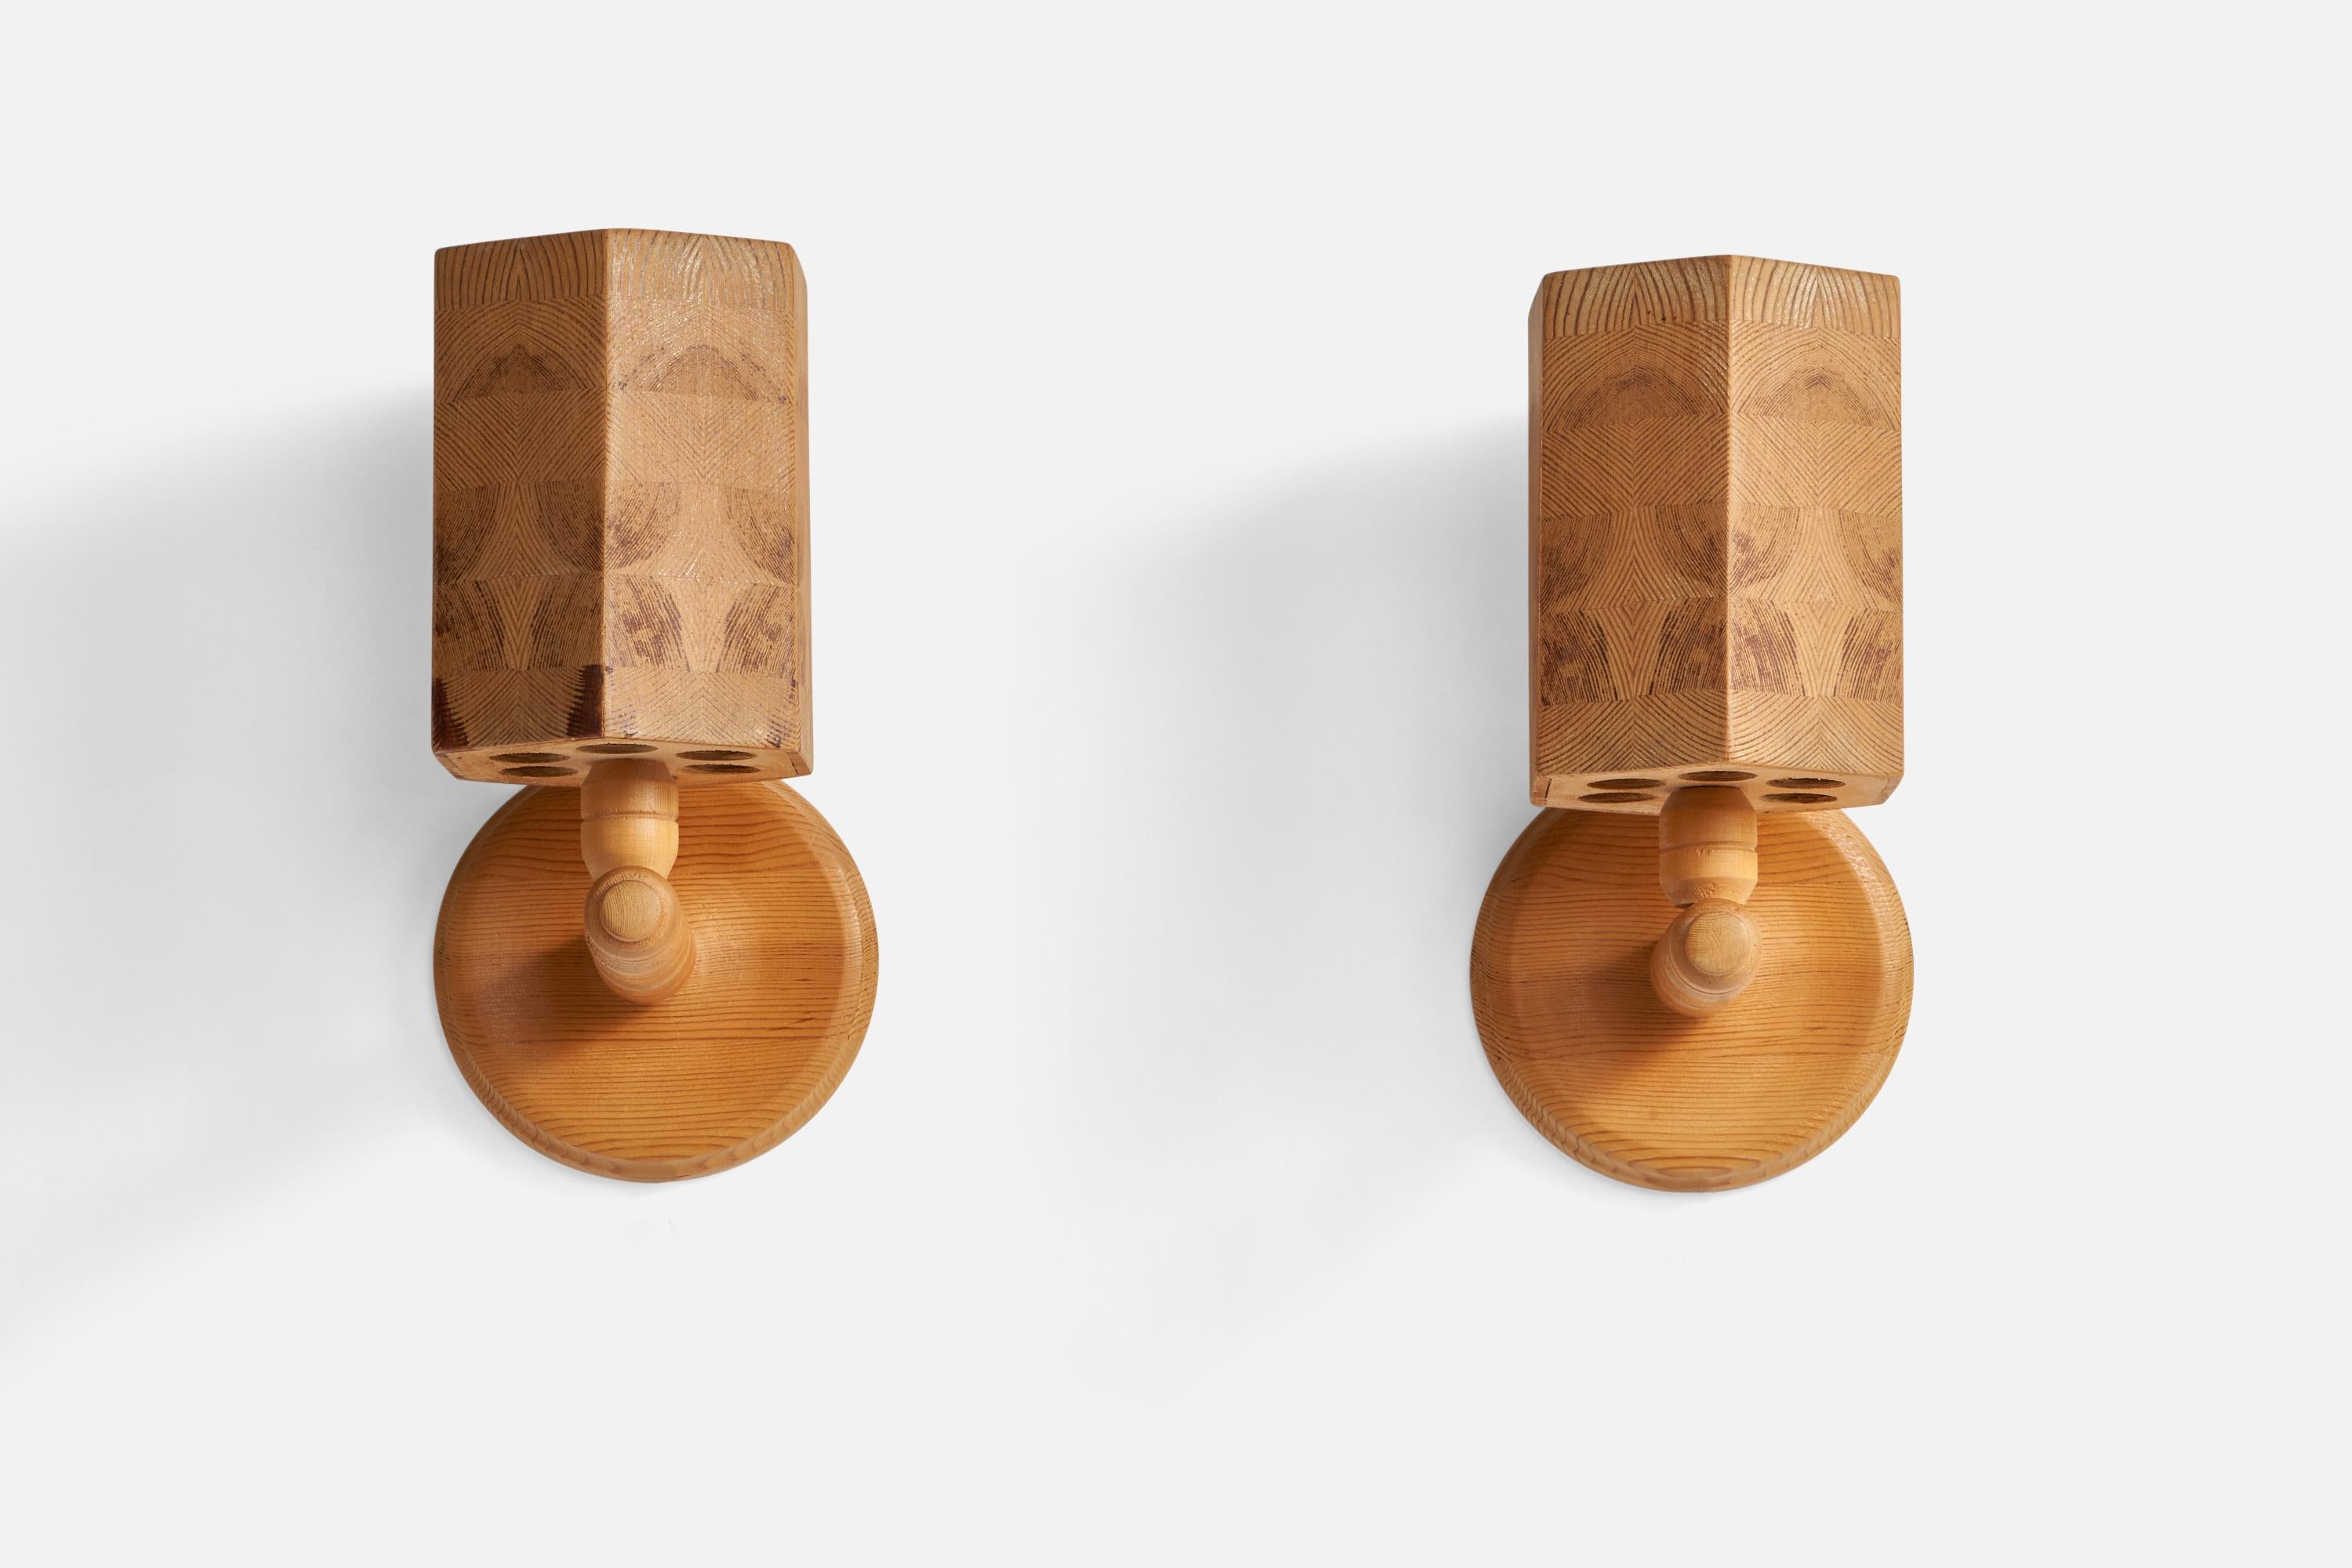 A pair of pine wall lights designed and produced in Sweden, c. 1970s.

Overall Dimensions (inches): 11.6” H x 5.9” W x 6.5” D
Back Plate Dimensions (inches): 5.93” Diameter x 0.75” Depth
Bulb Specifications: E-14 Bulbs
Number of Sockets: 2
All